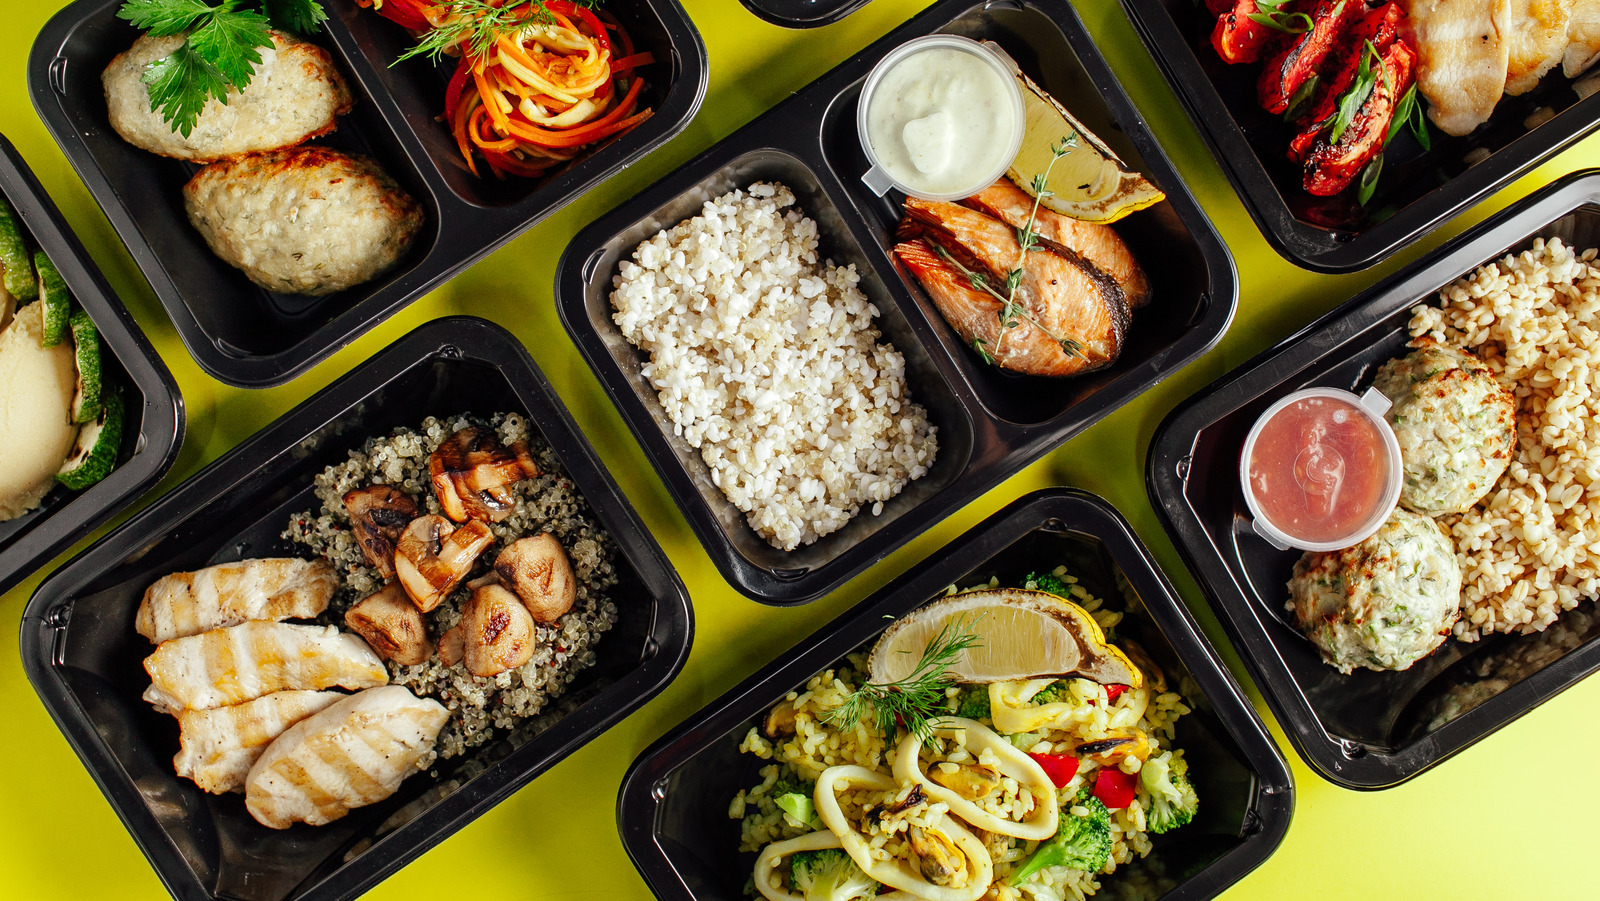 Your Meal Preps May Be Hurting Your Health. Here's What To Know - CNET